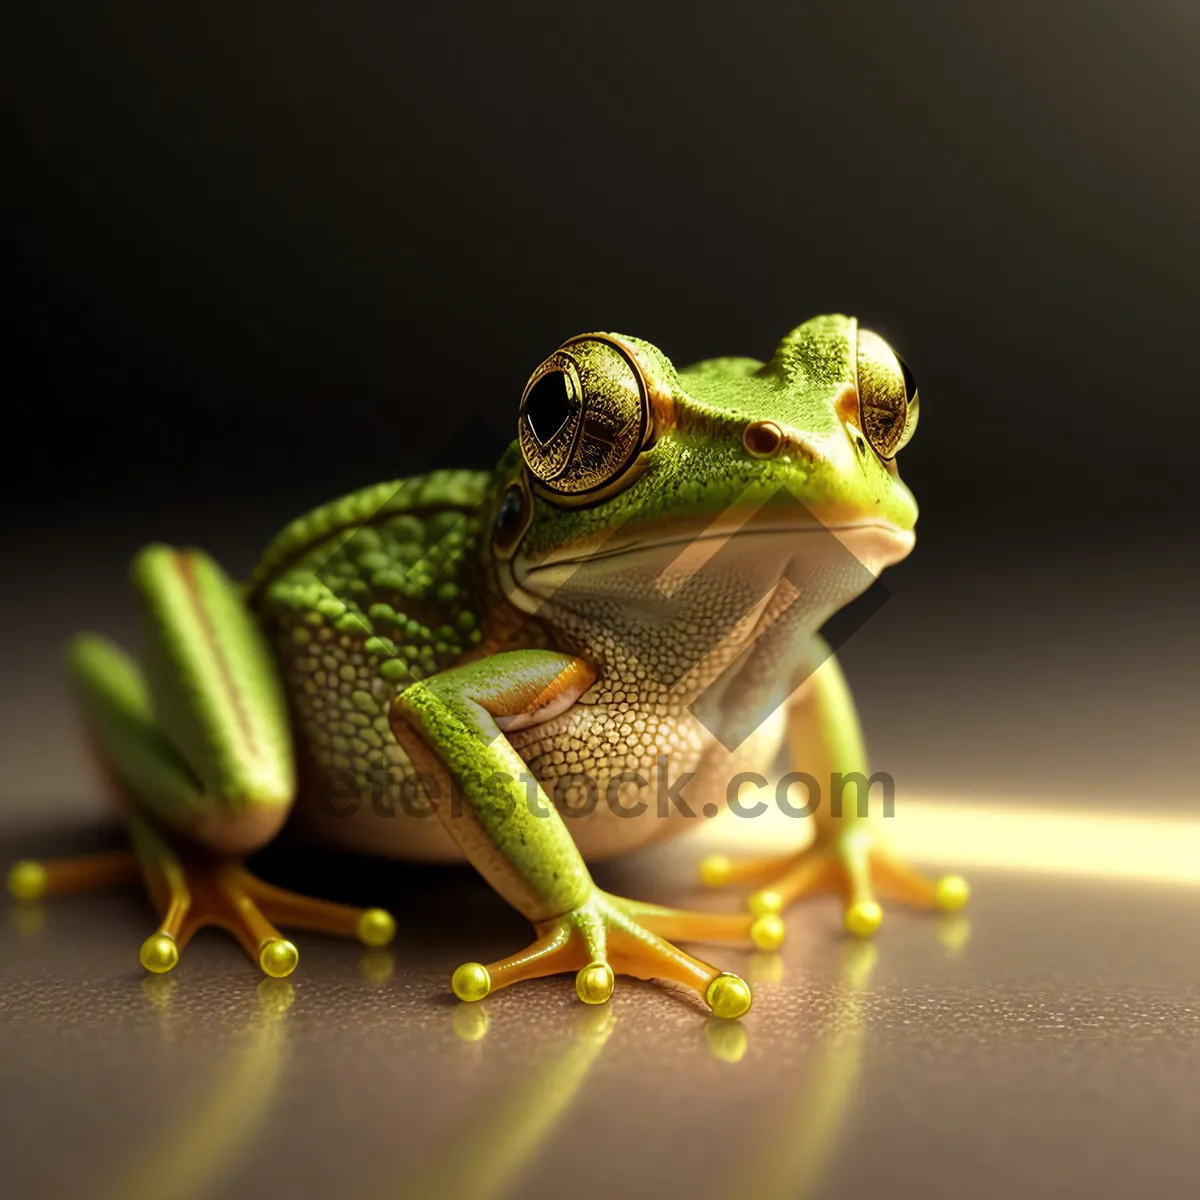 Picture of Eyed Tree Frog Close-up: Colorful Amphibian Wildlife